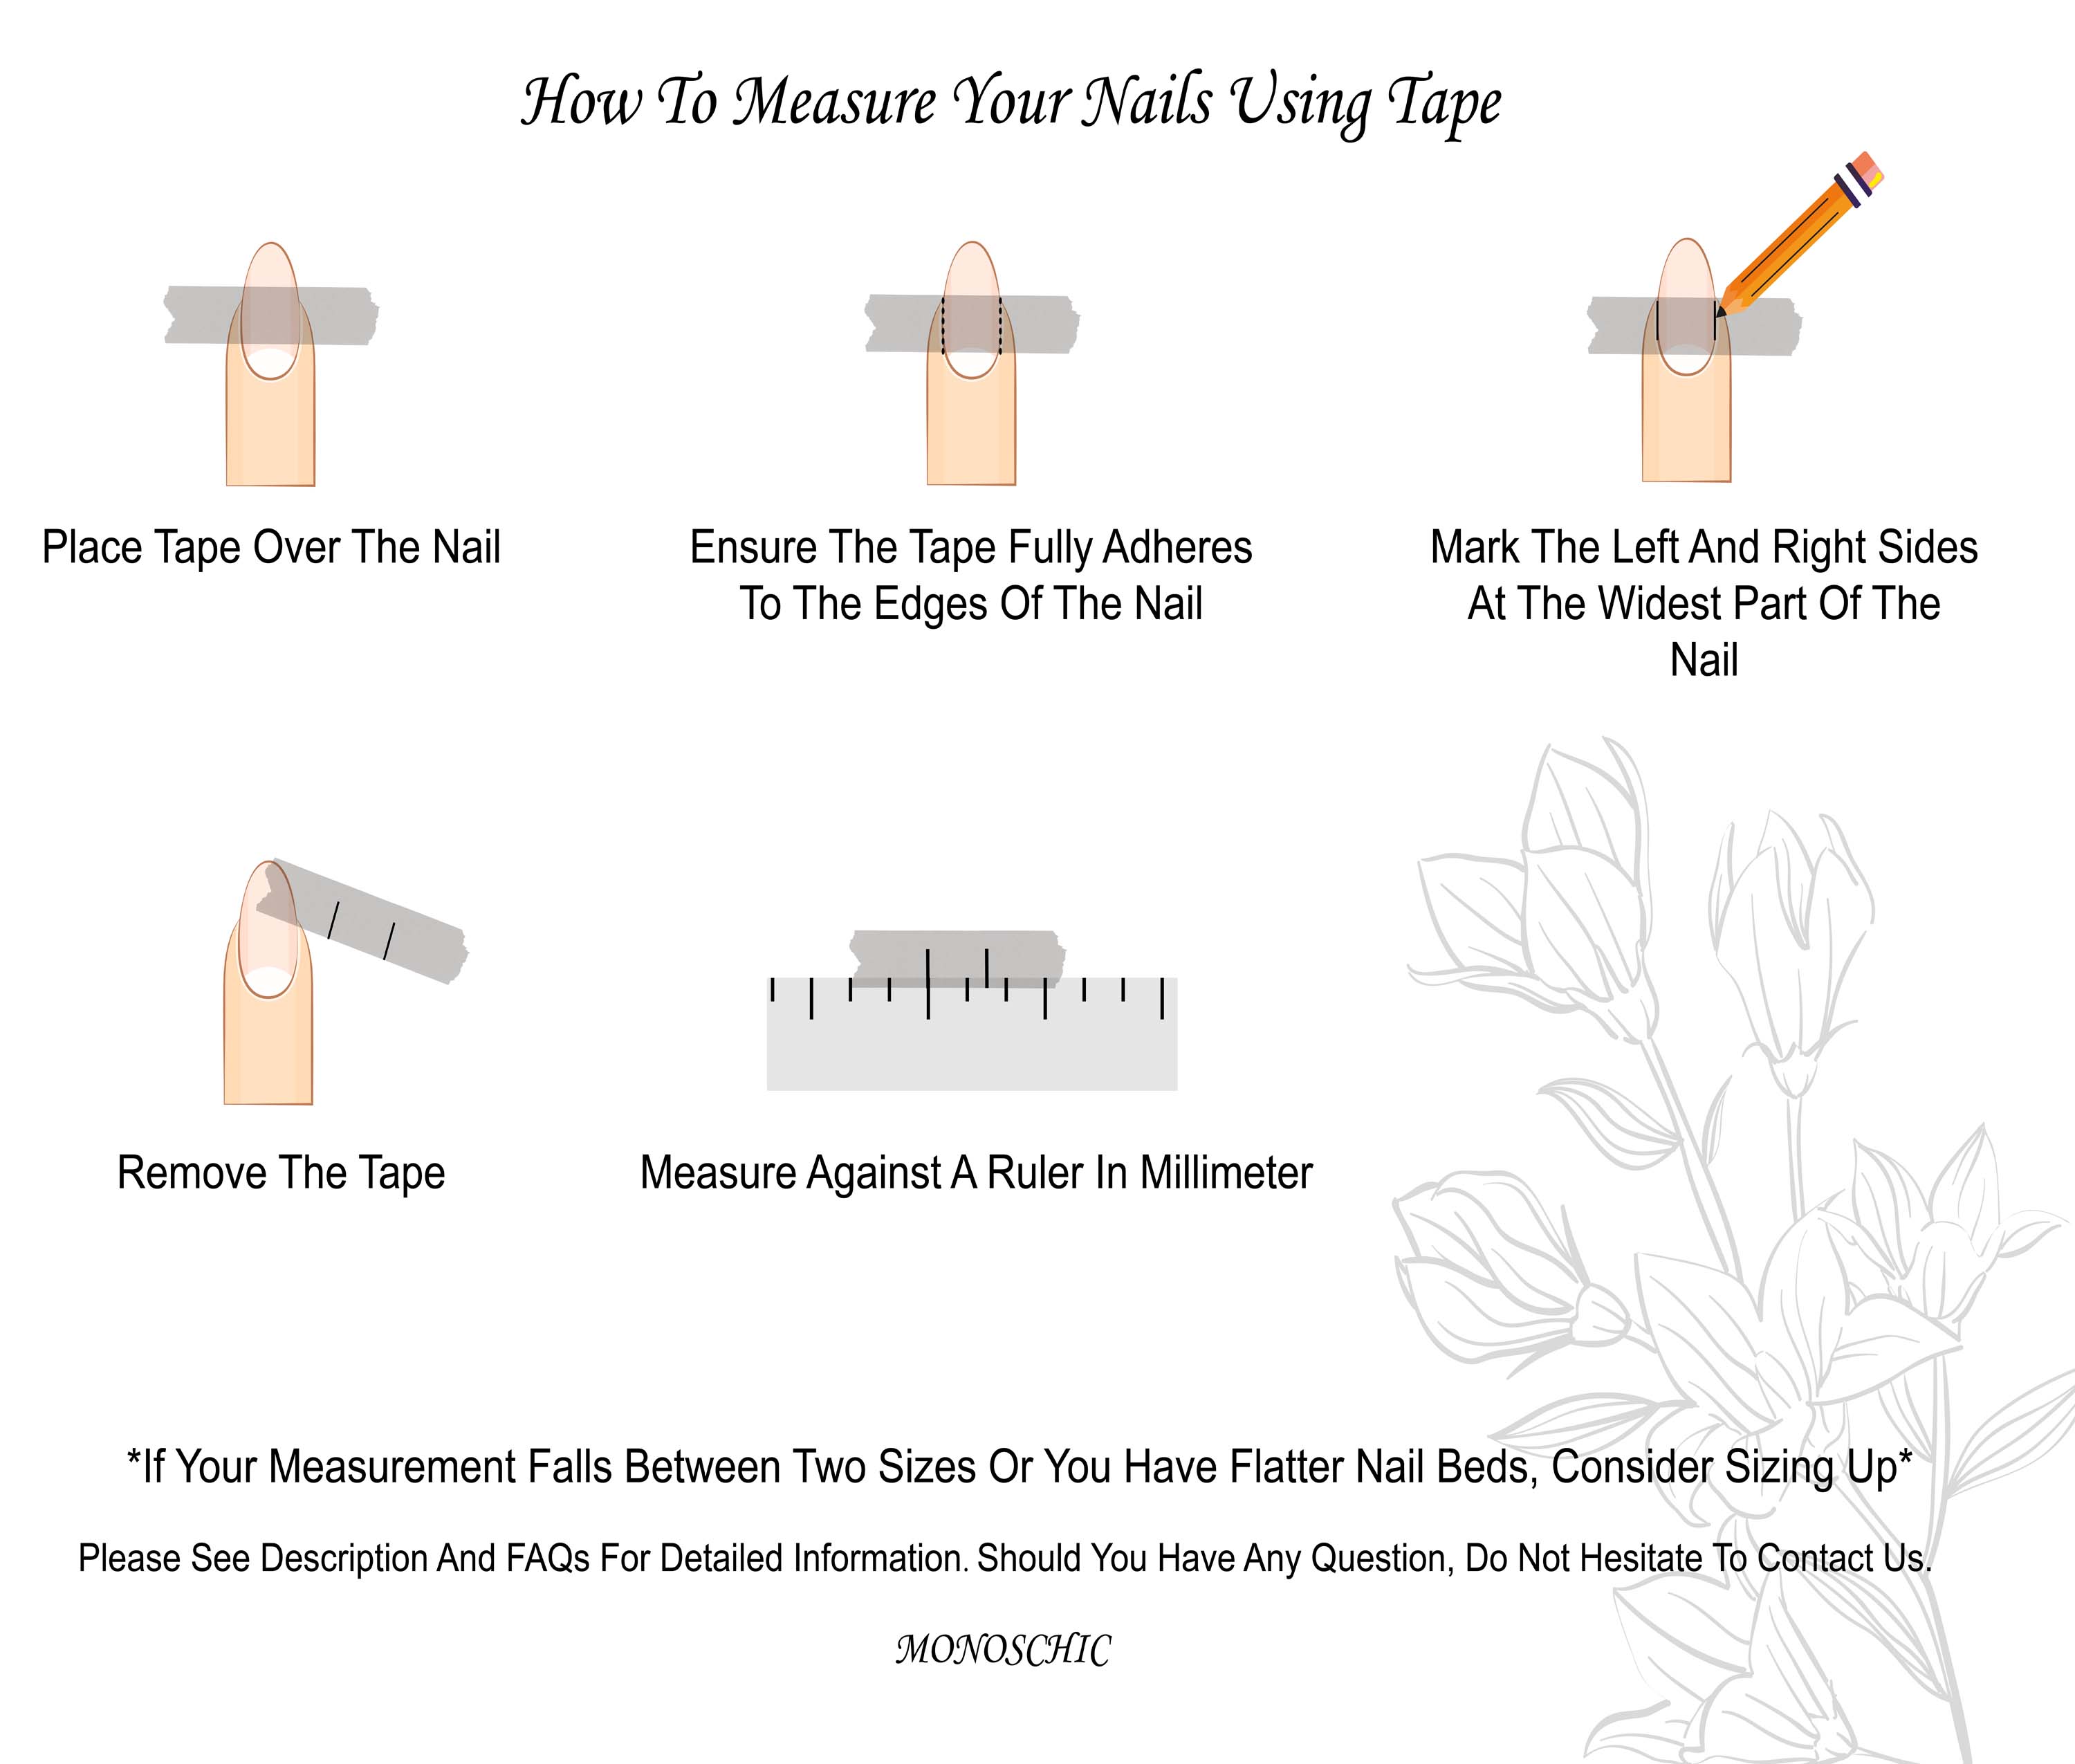 how to measure nail size, monoschic nails